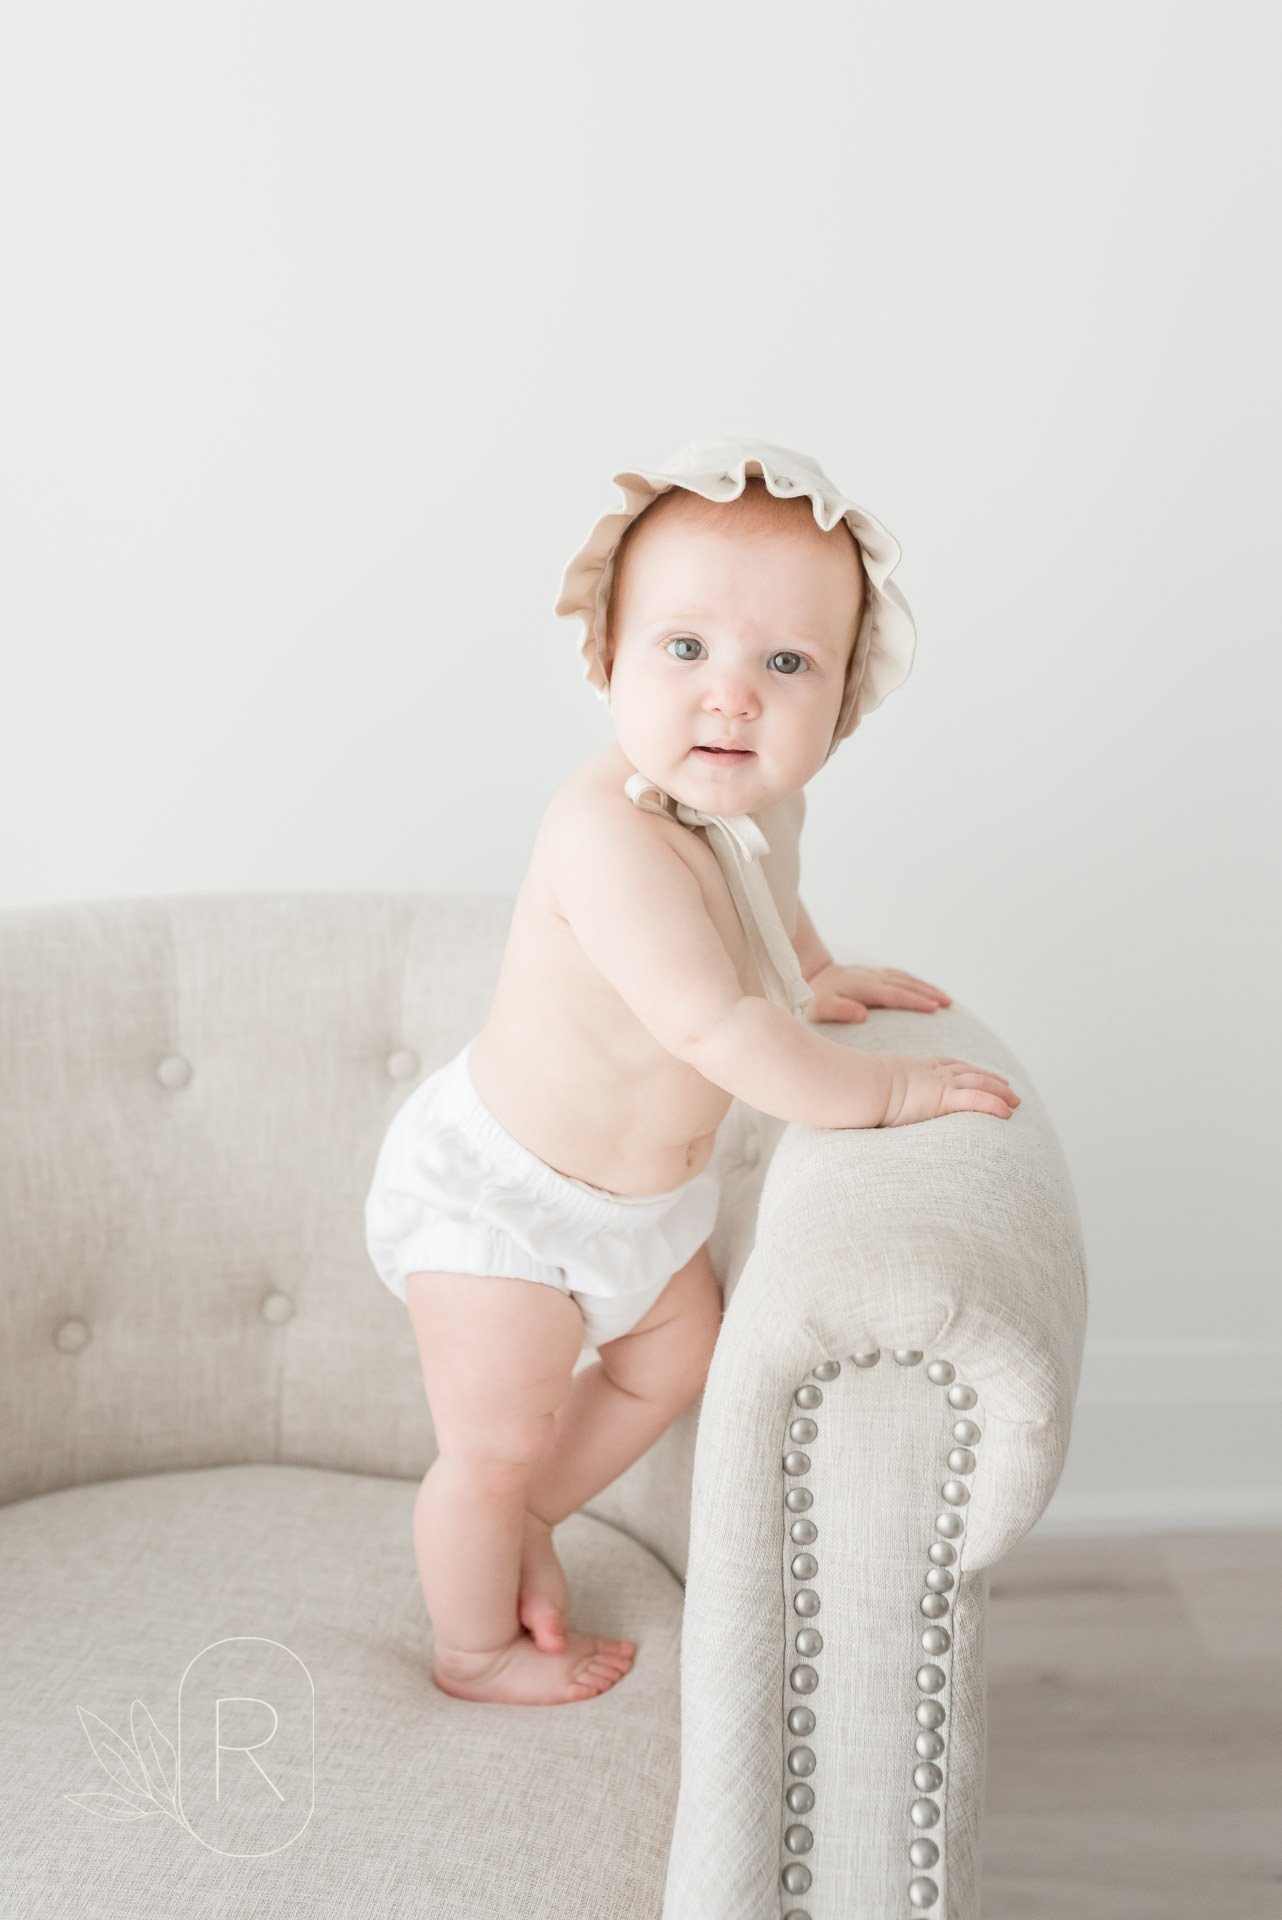 Niagara baby photographer, sitter sessions Grmsby